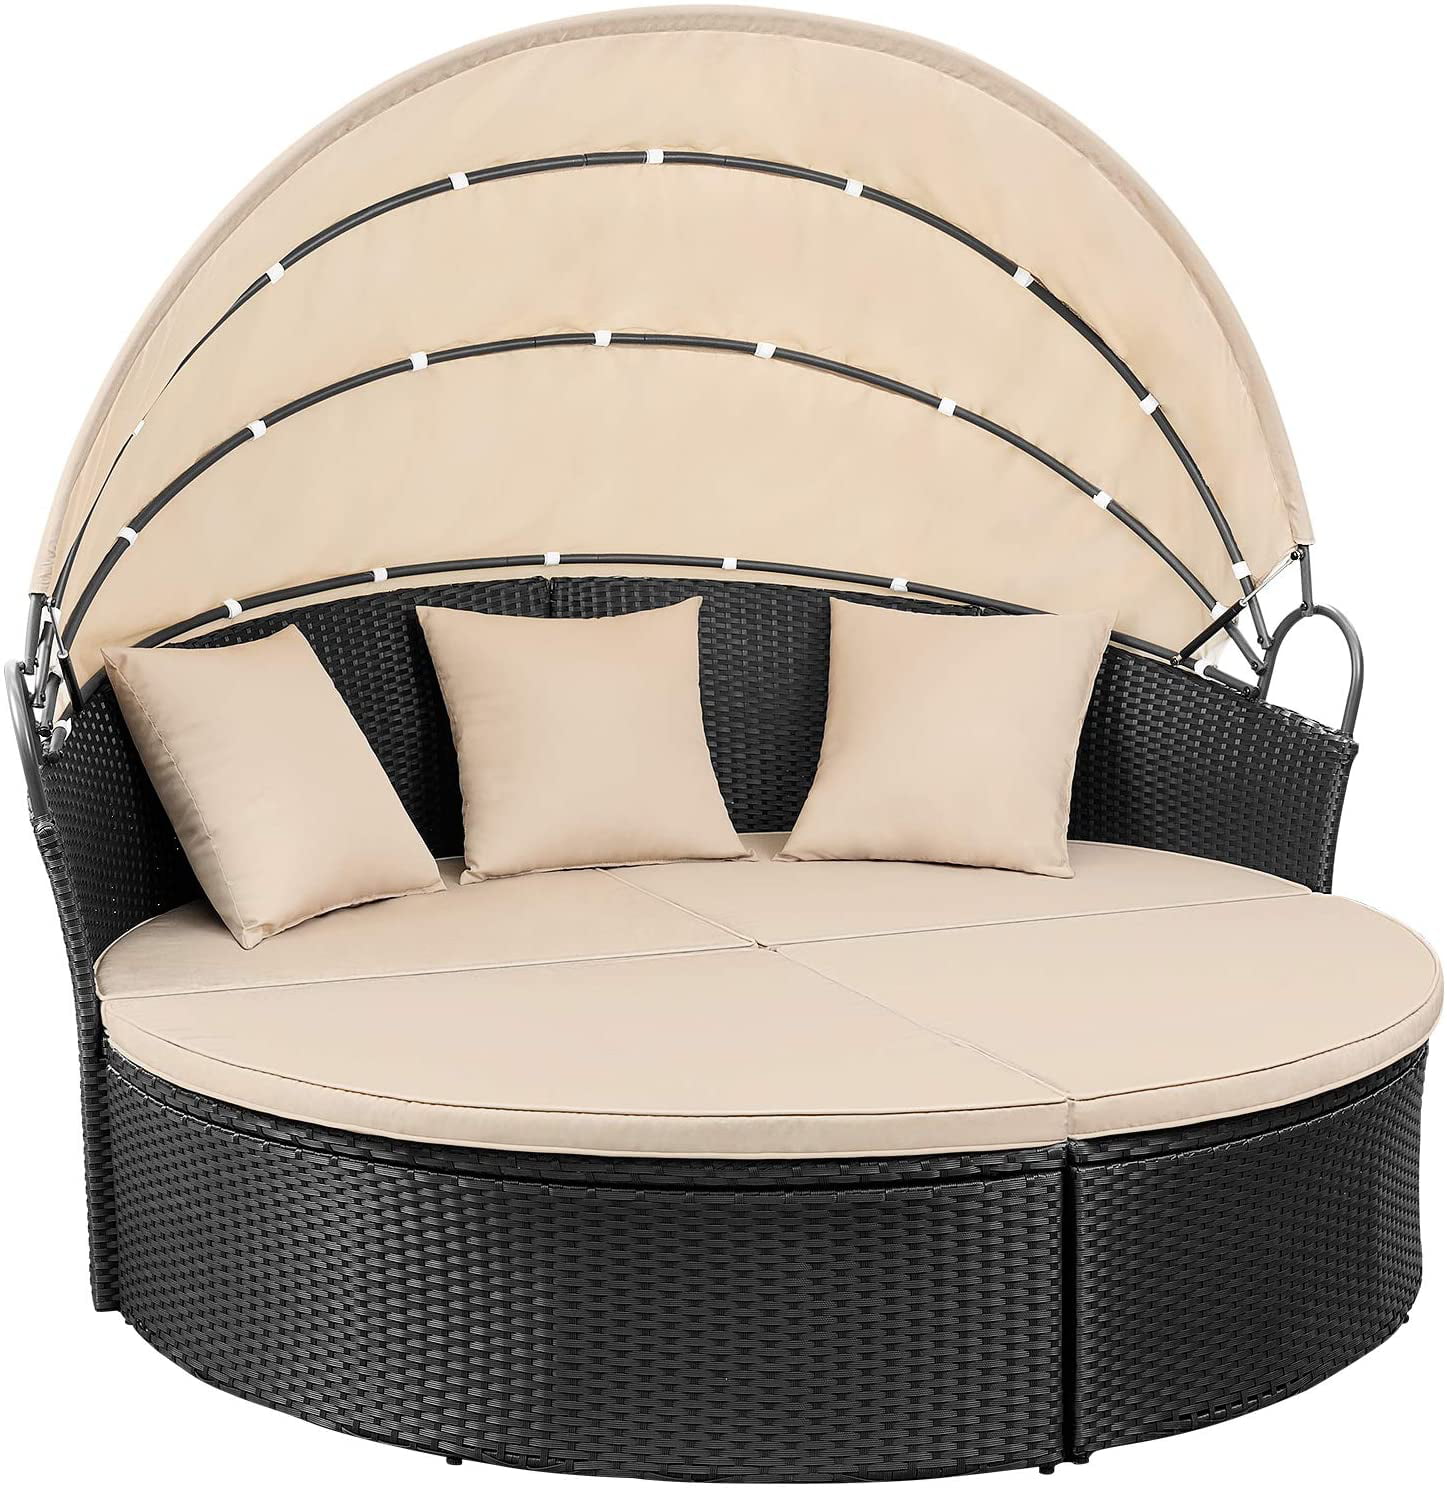 Devoko Outdoor Patio Round Daybed with Retractable Canopy Wicker Furniture Sectiona Daybedl with  Separated Seating, Beige